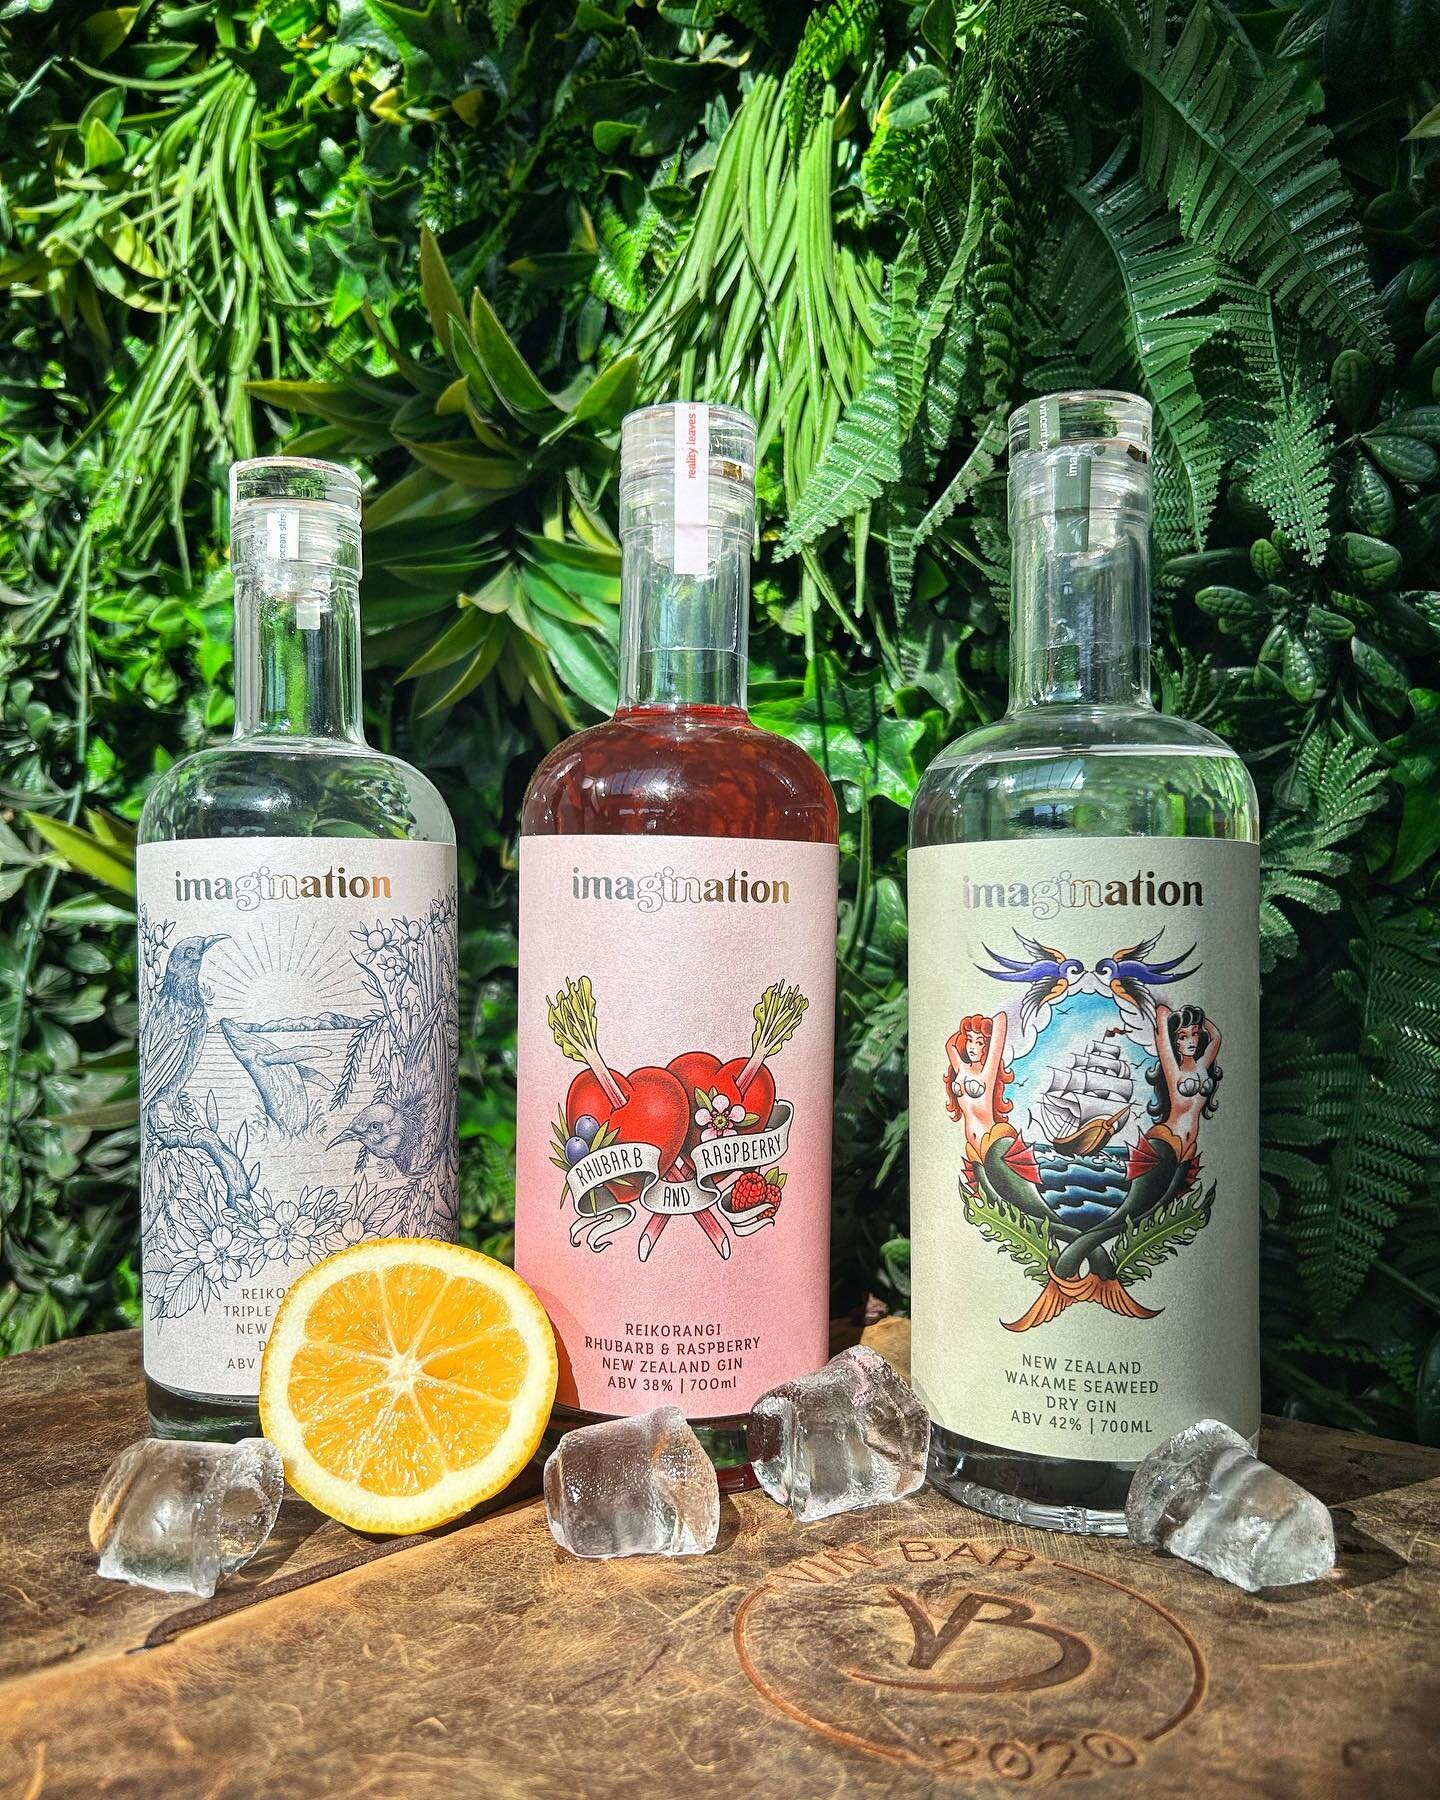 Fancy some homegrown Gin? We&rsquo;ve got ya covered ✨🍋
@imaginationgin 🥂
#gin #gintonic #cocktail #newzealand #homegrown